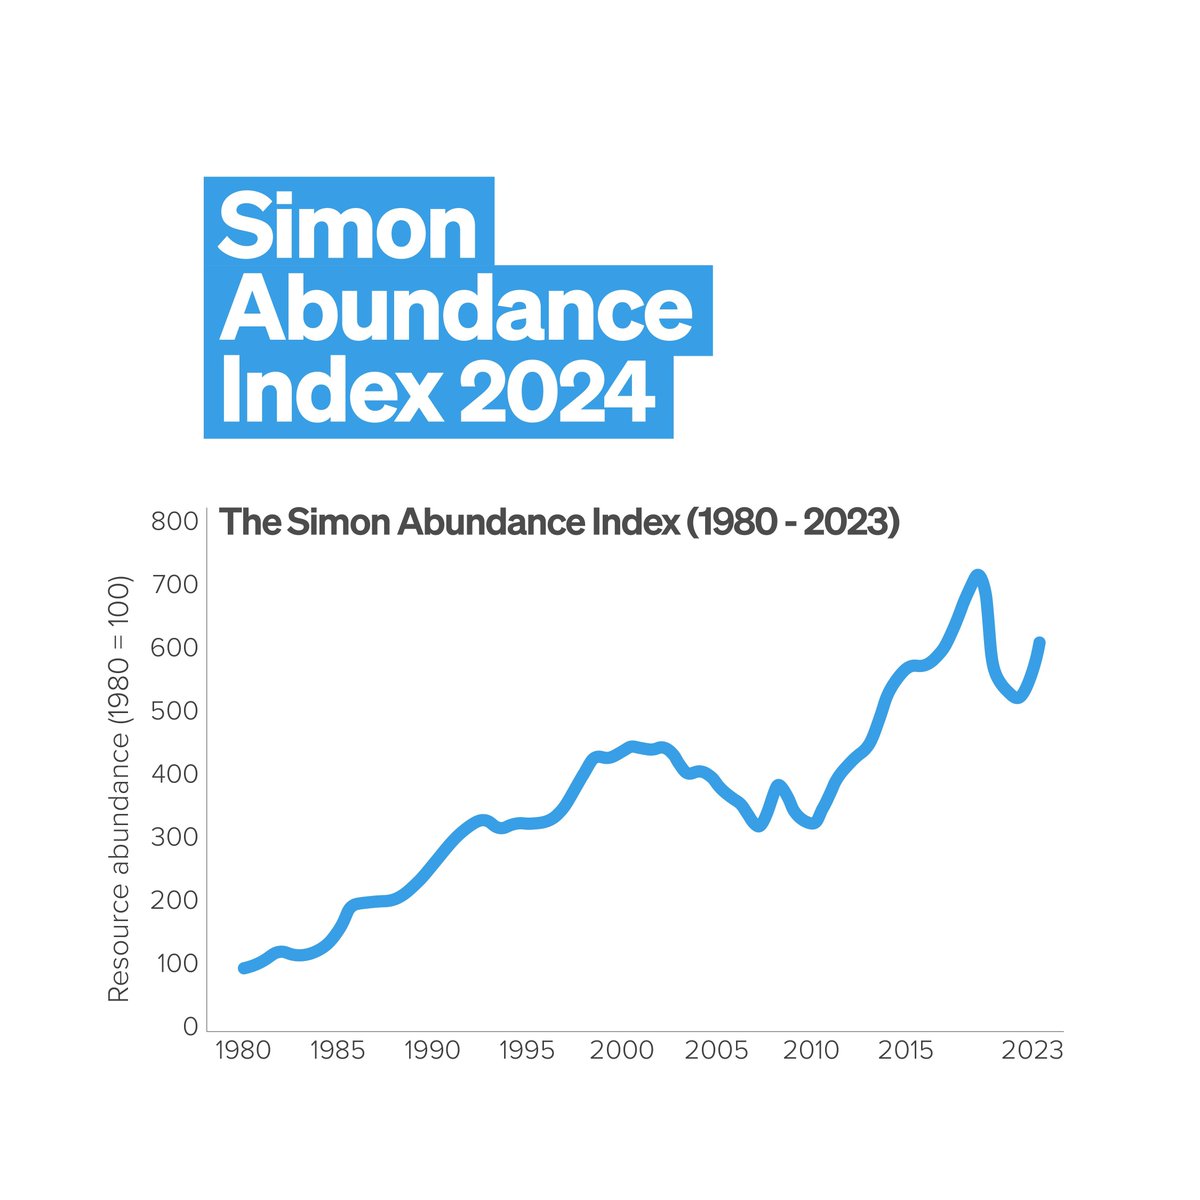 Contrary to Malthusian predictions, population growth does not lead to resource scarcity. Resource abundance is actually increasing faster than the population is growing. #SimonAbundanceIndex Read more: humanprogress.org/the-simon-abun…